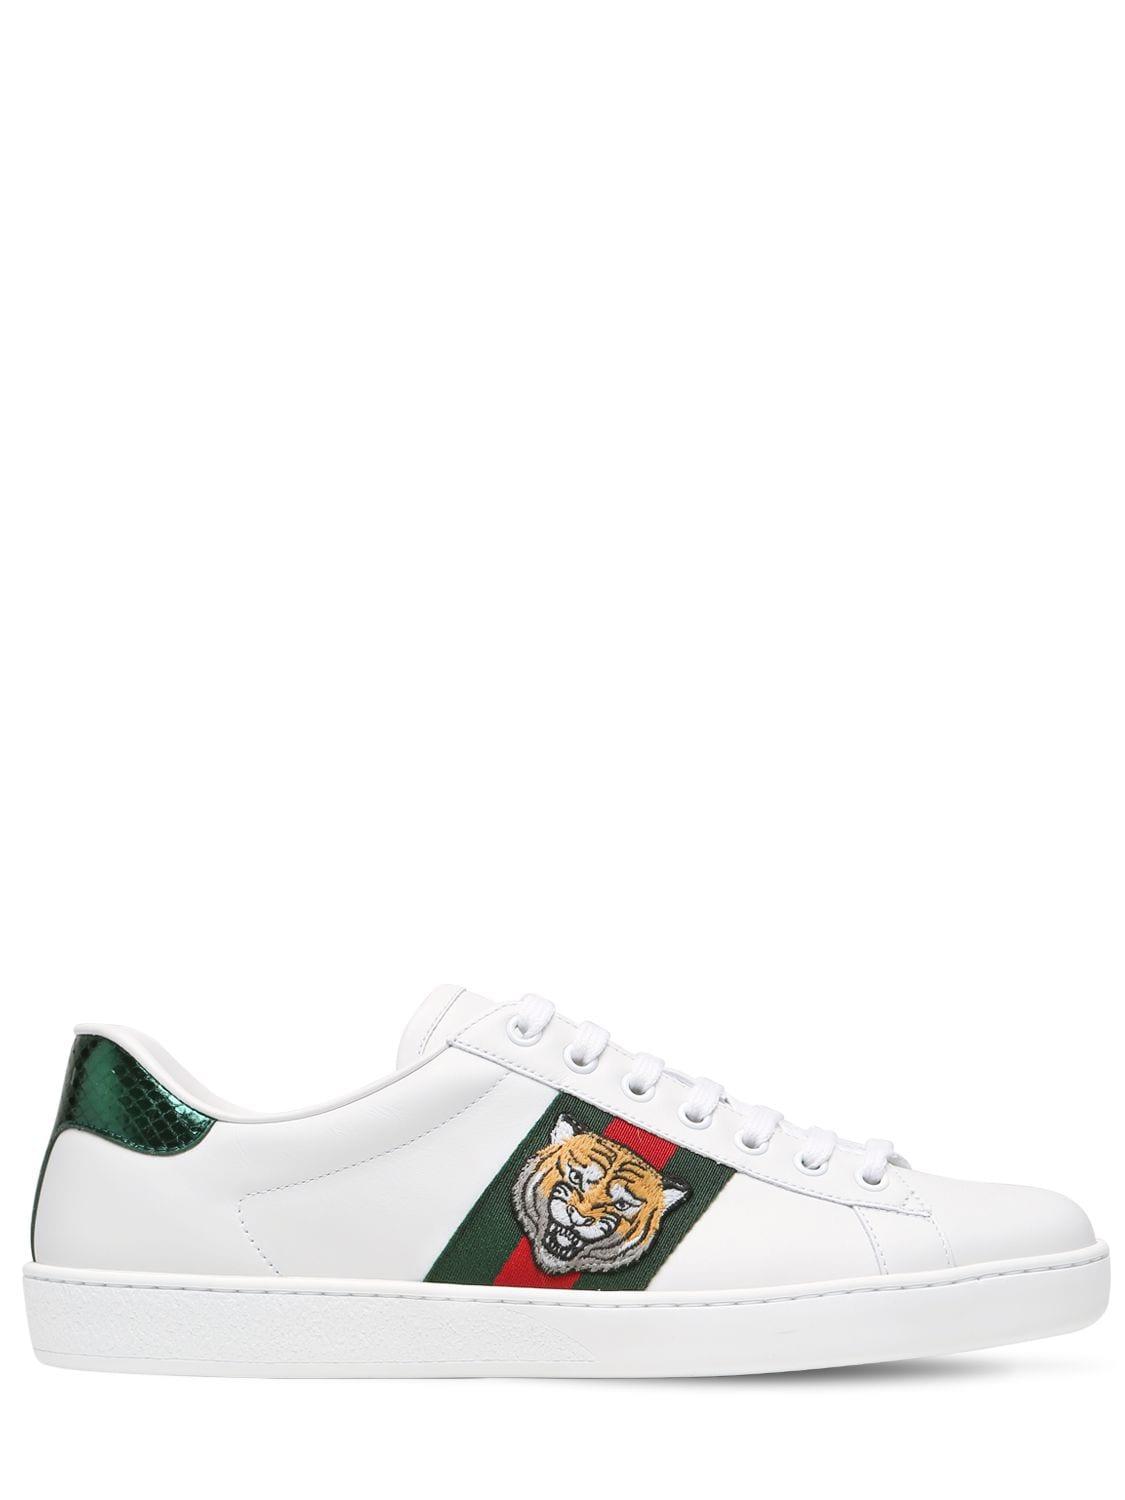 Gucci Tiger New Ace Leather Sneakers W/ Ayers in White for Men - Lyst